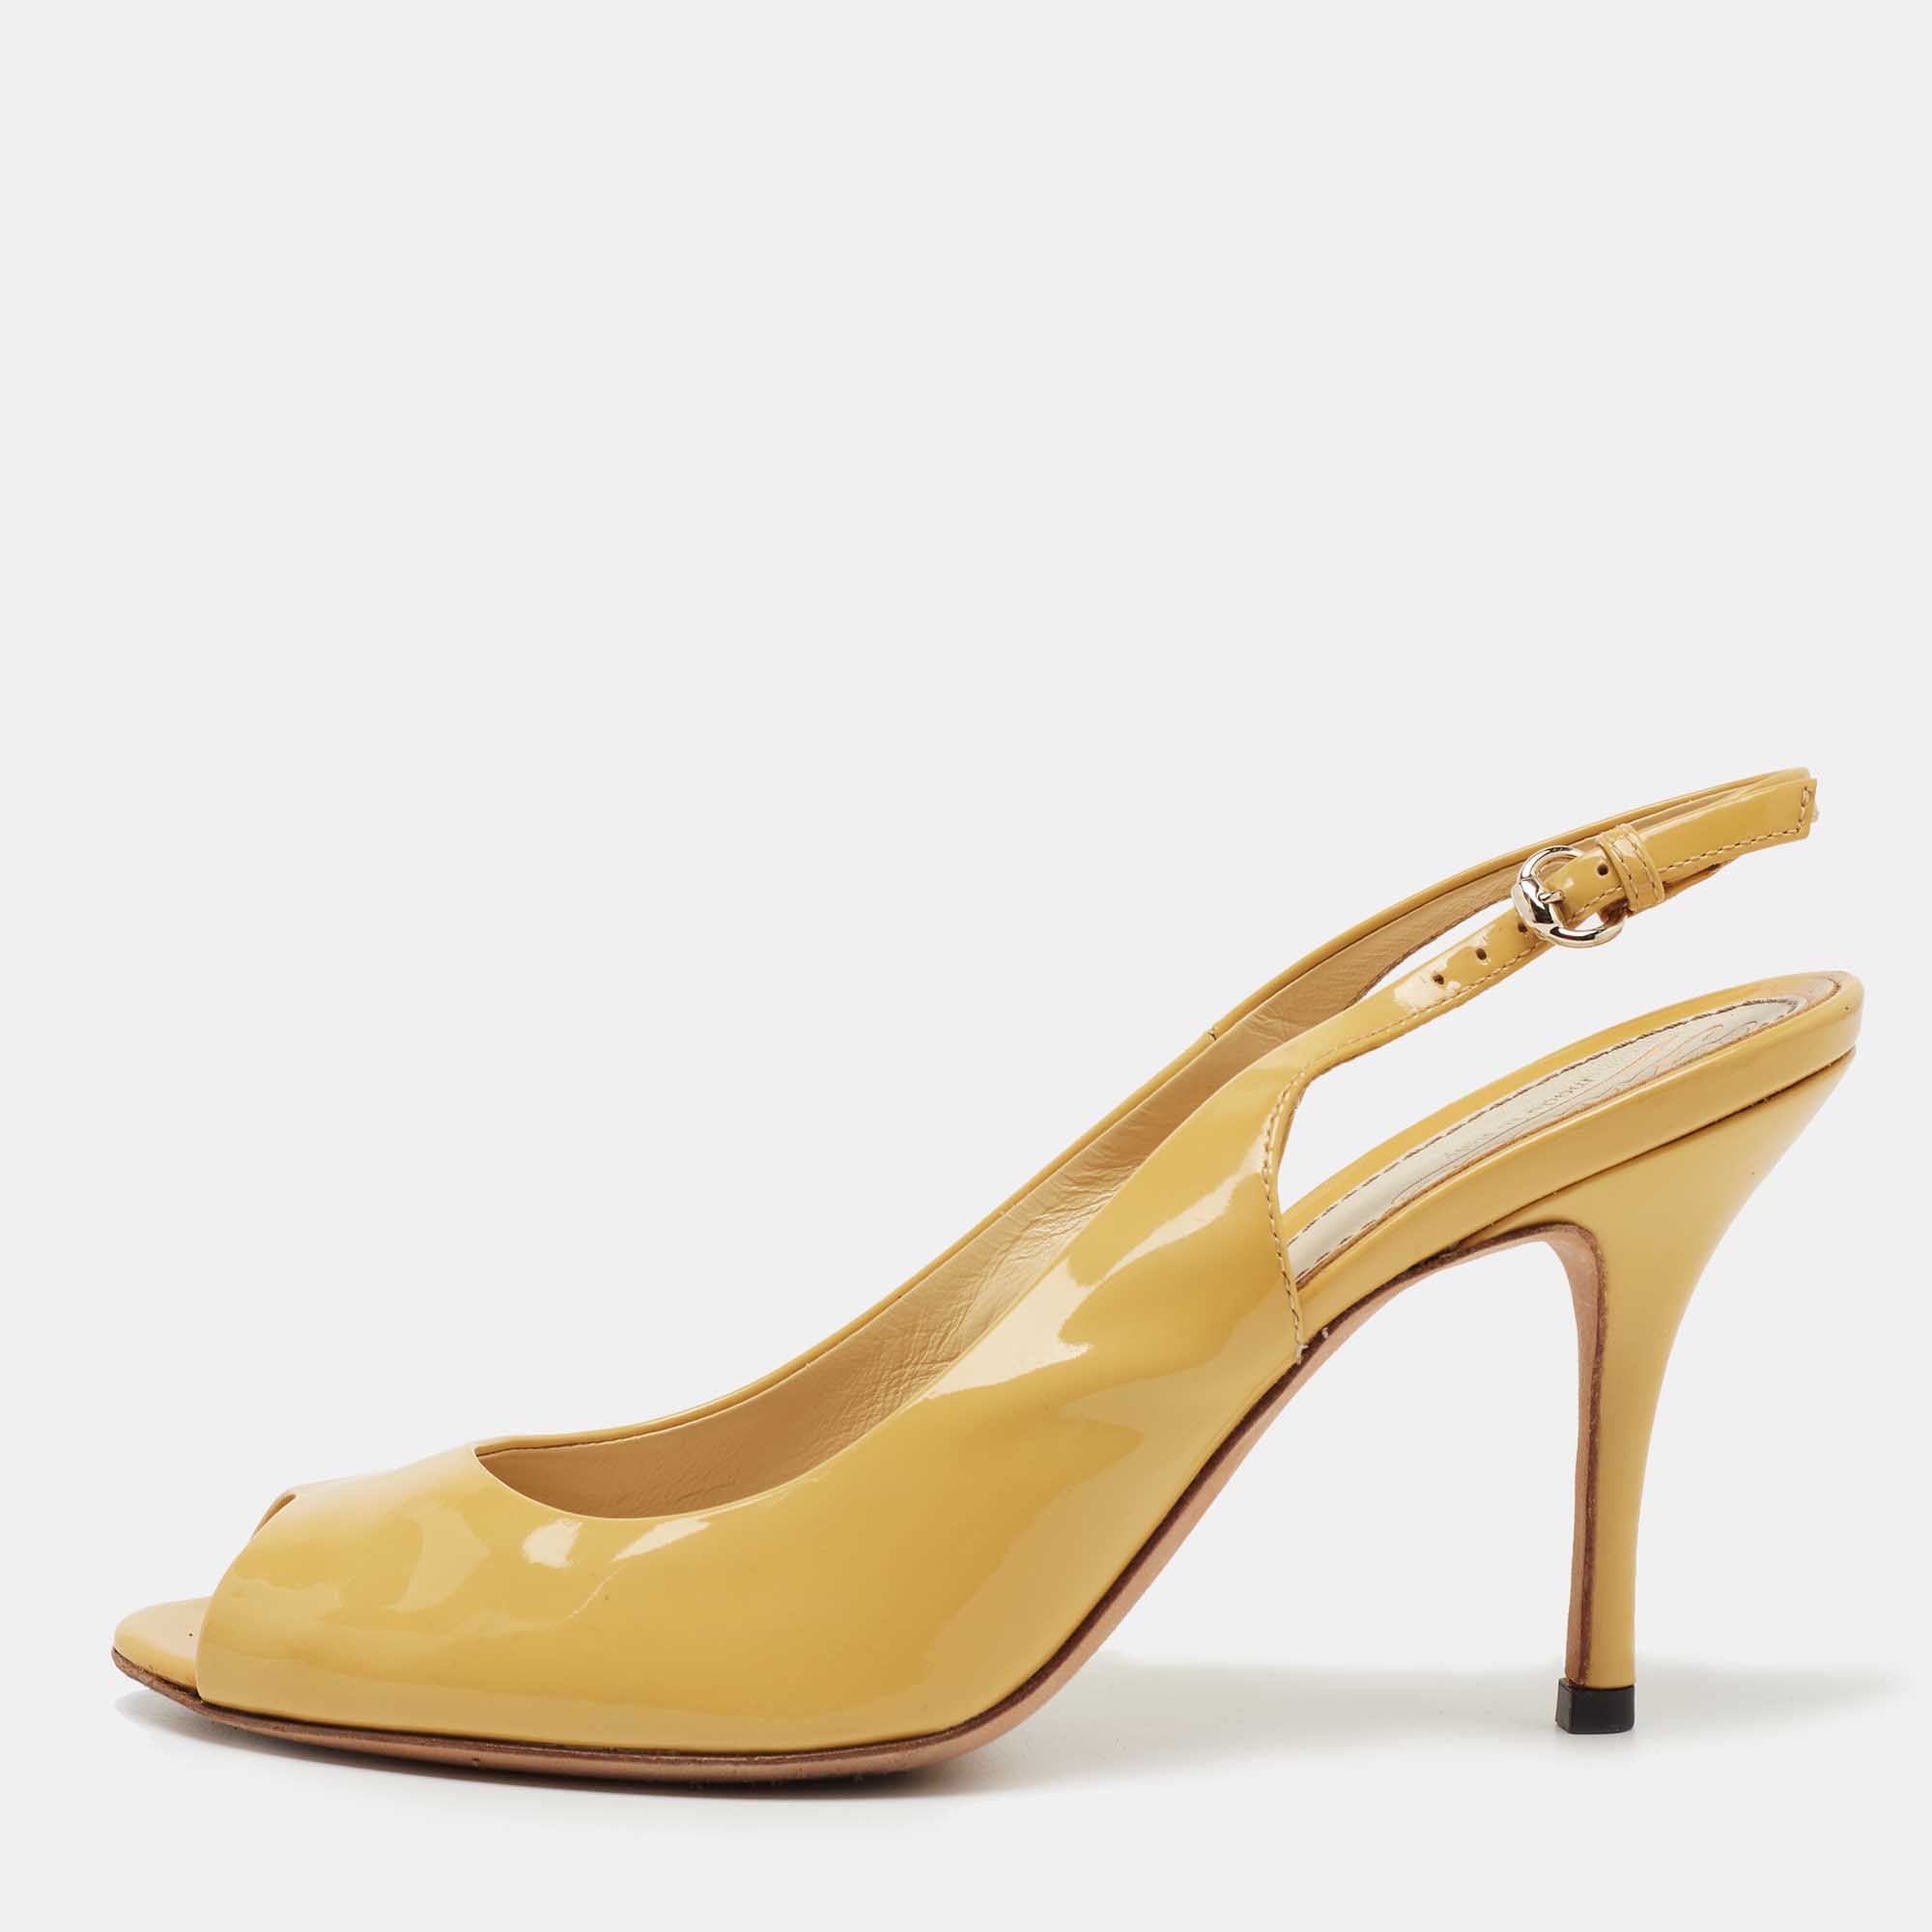 Pre-owned Gucci Yellow Patent Leather Peep Toe Slingback Pumps Size 36